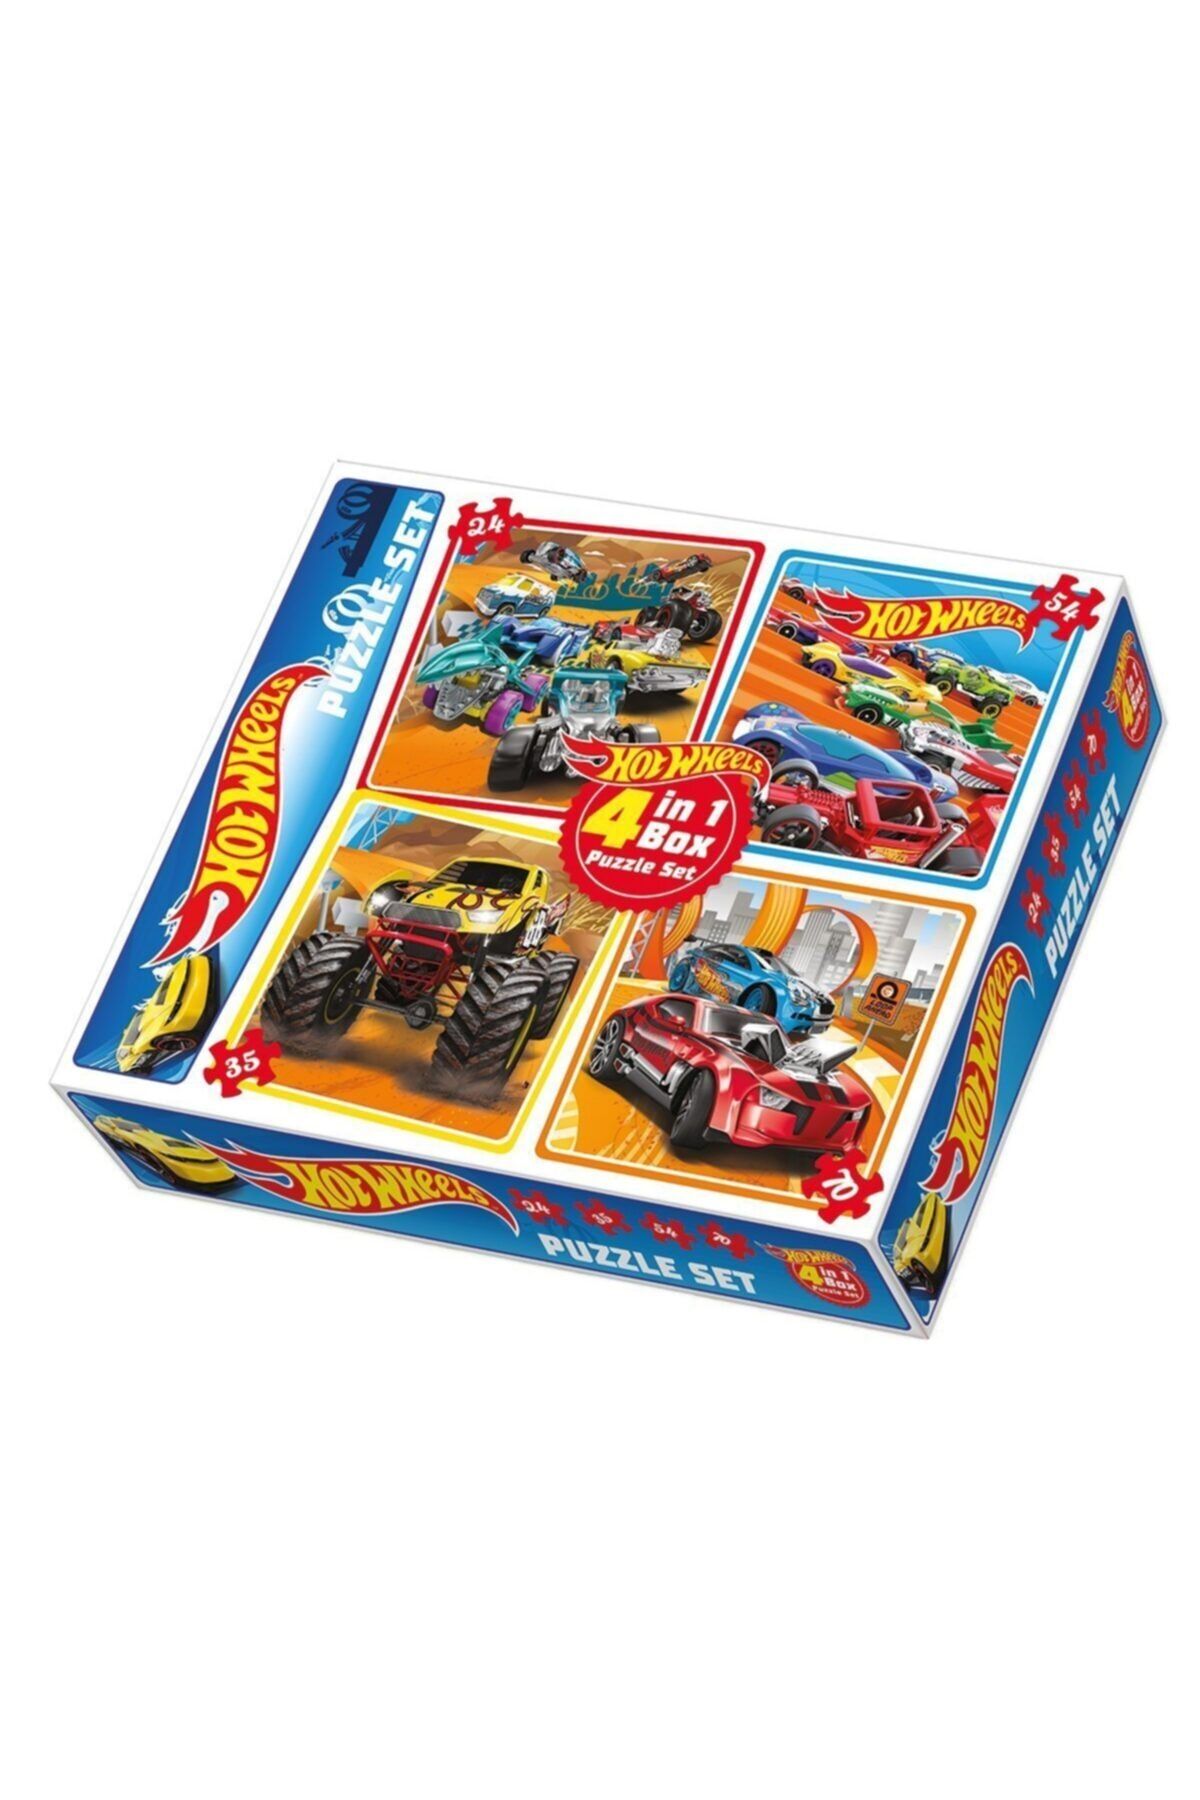 Diytoy Hot Wheels 4 In 1 Puzzle